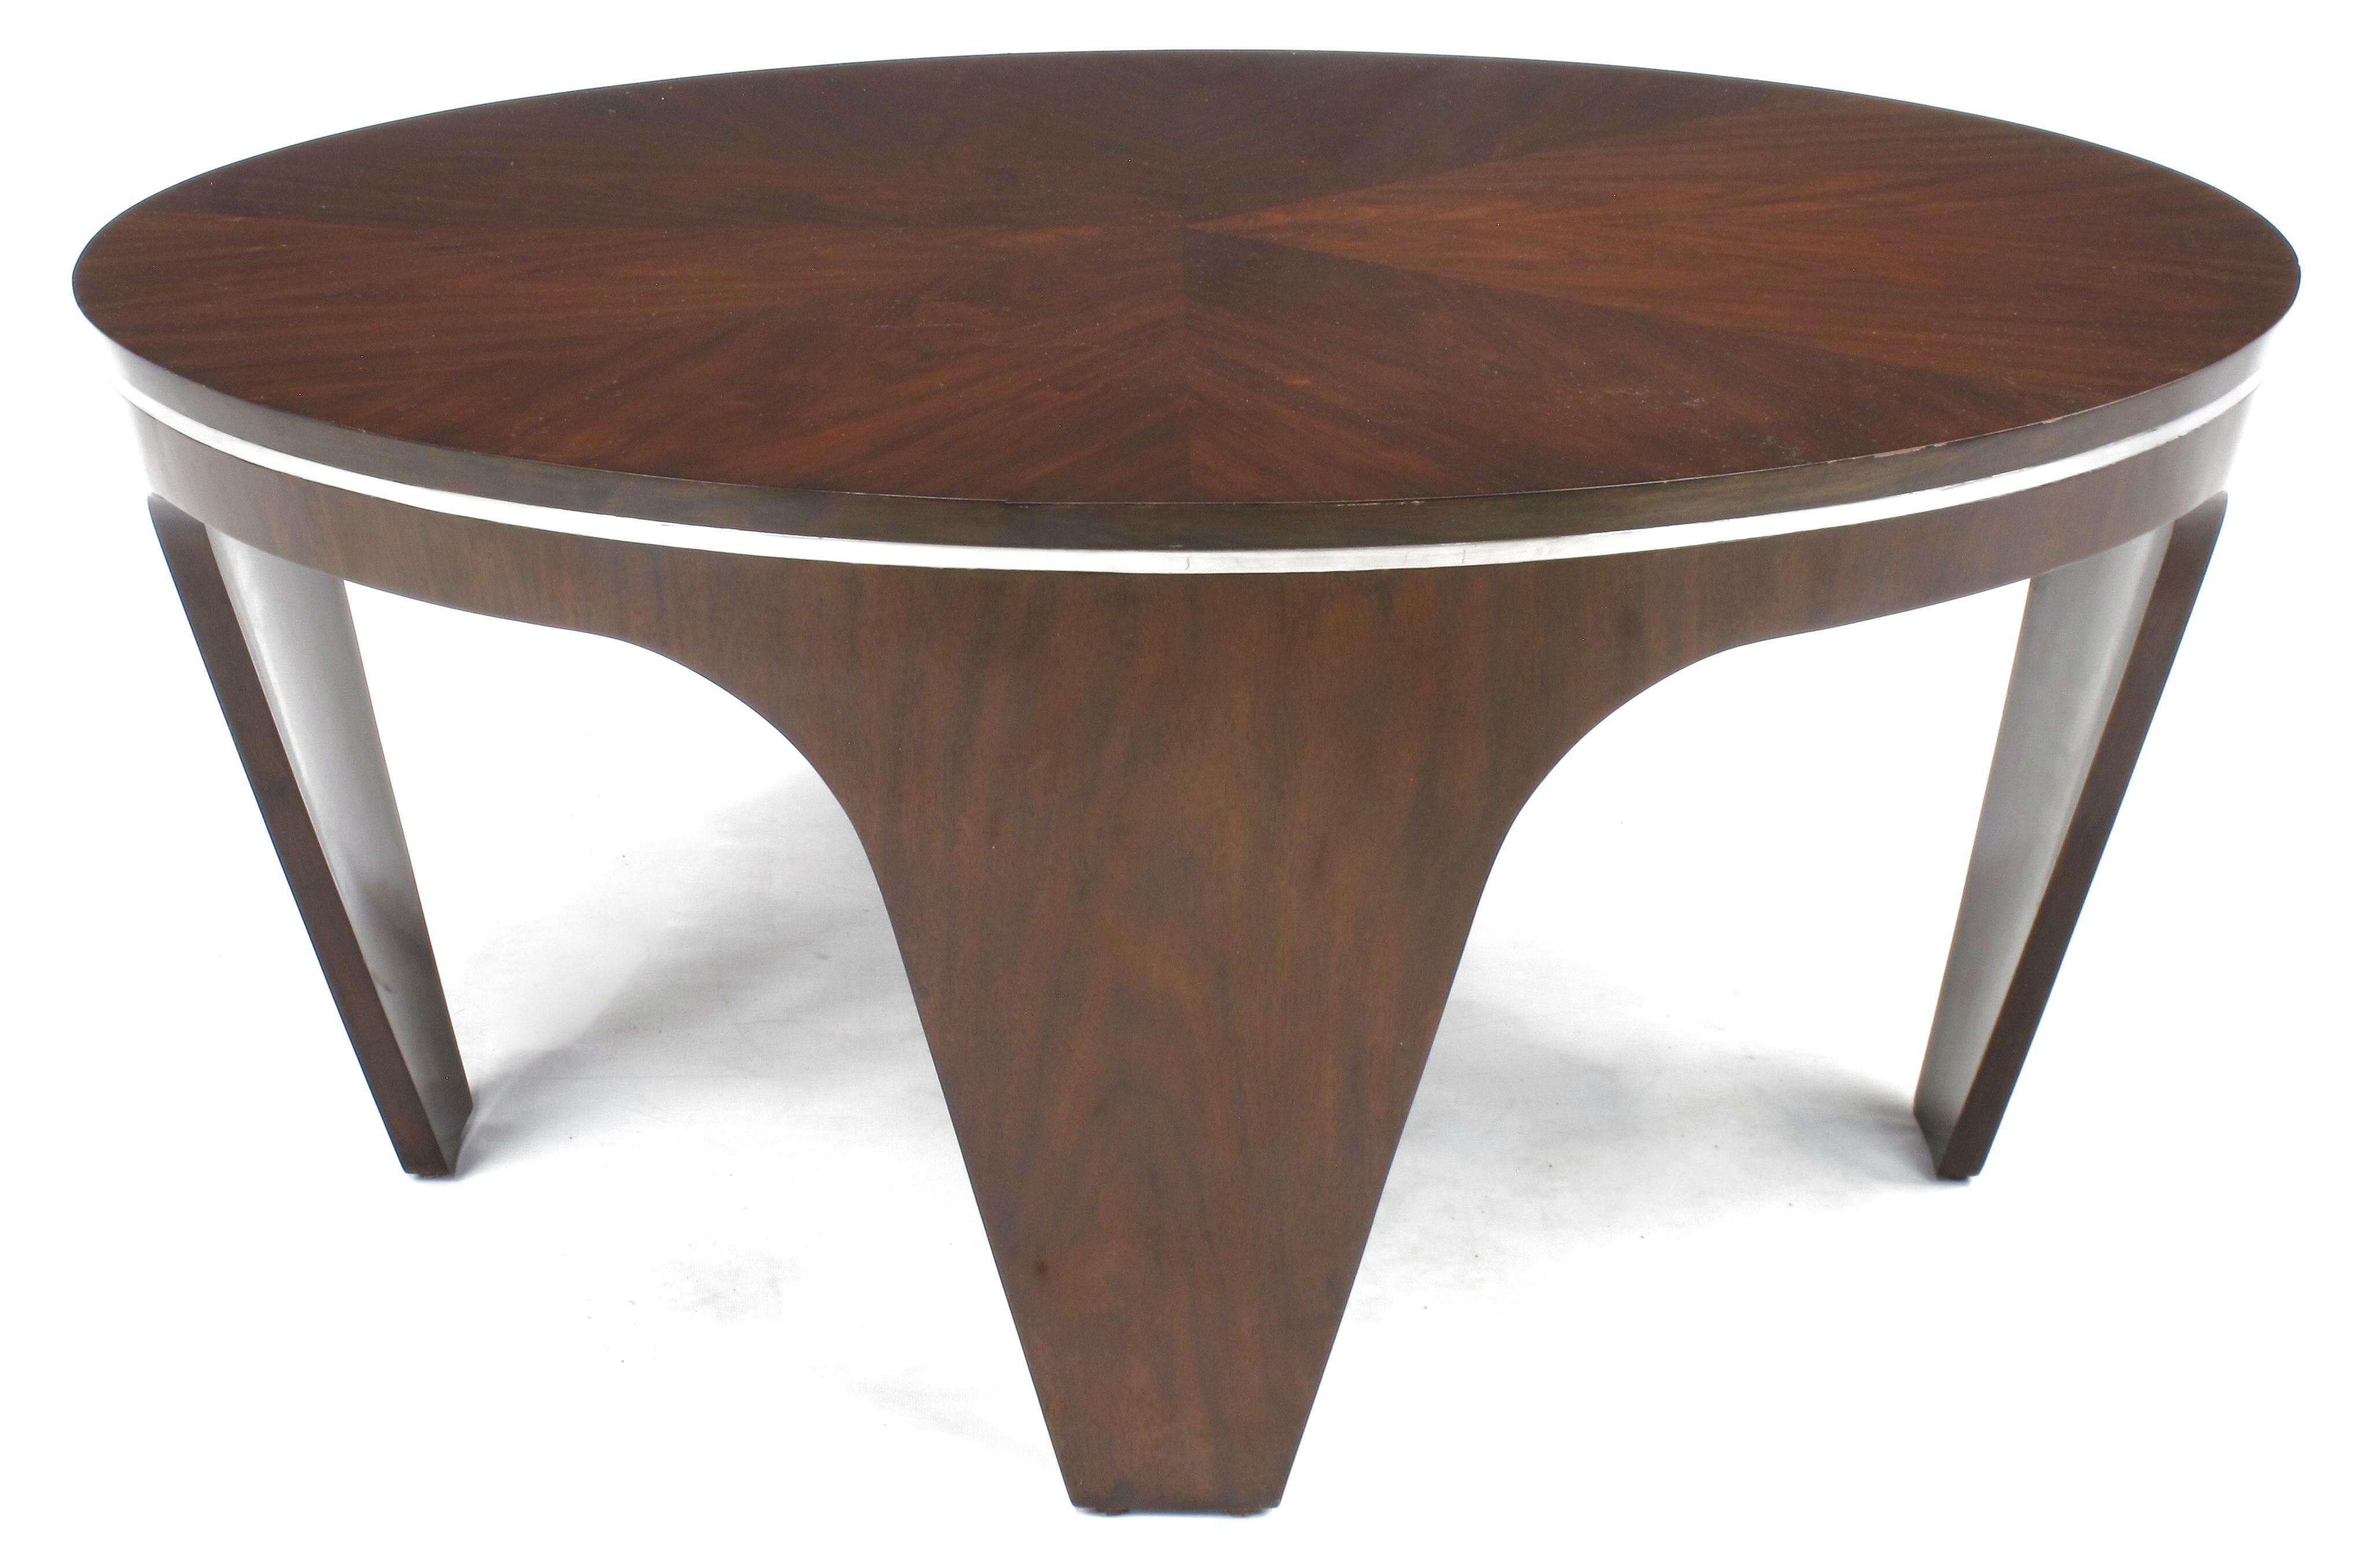 Glass Italian Art Deco Revival Round Mahogany Coffee Table with Parquetry Top